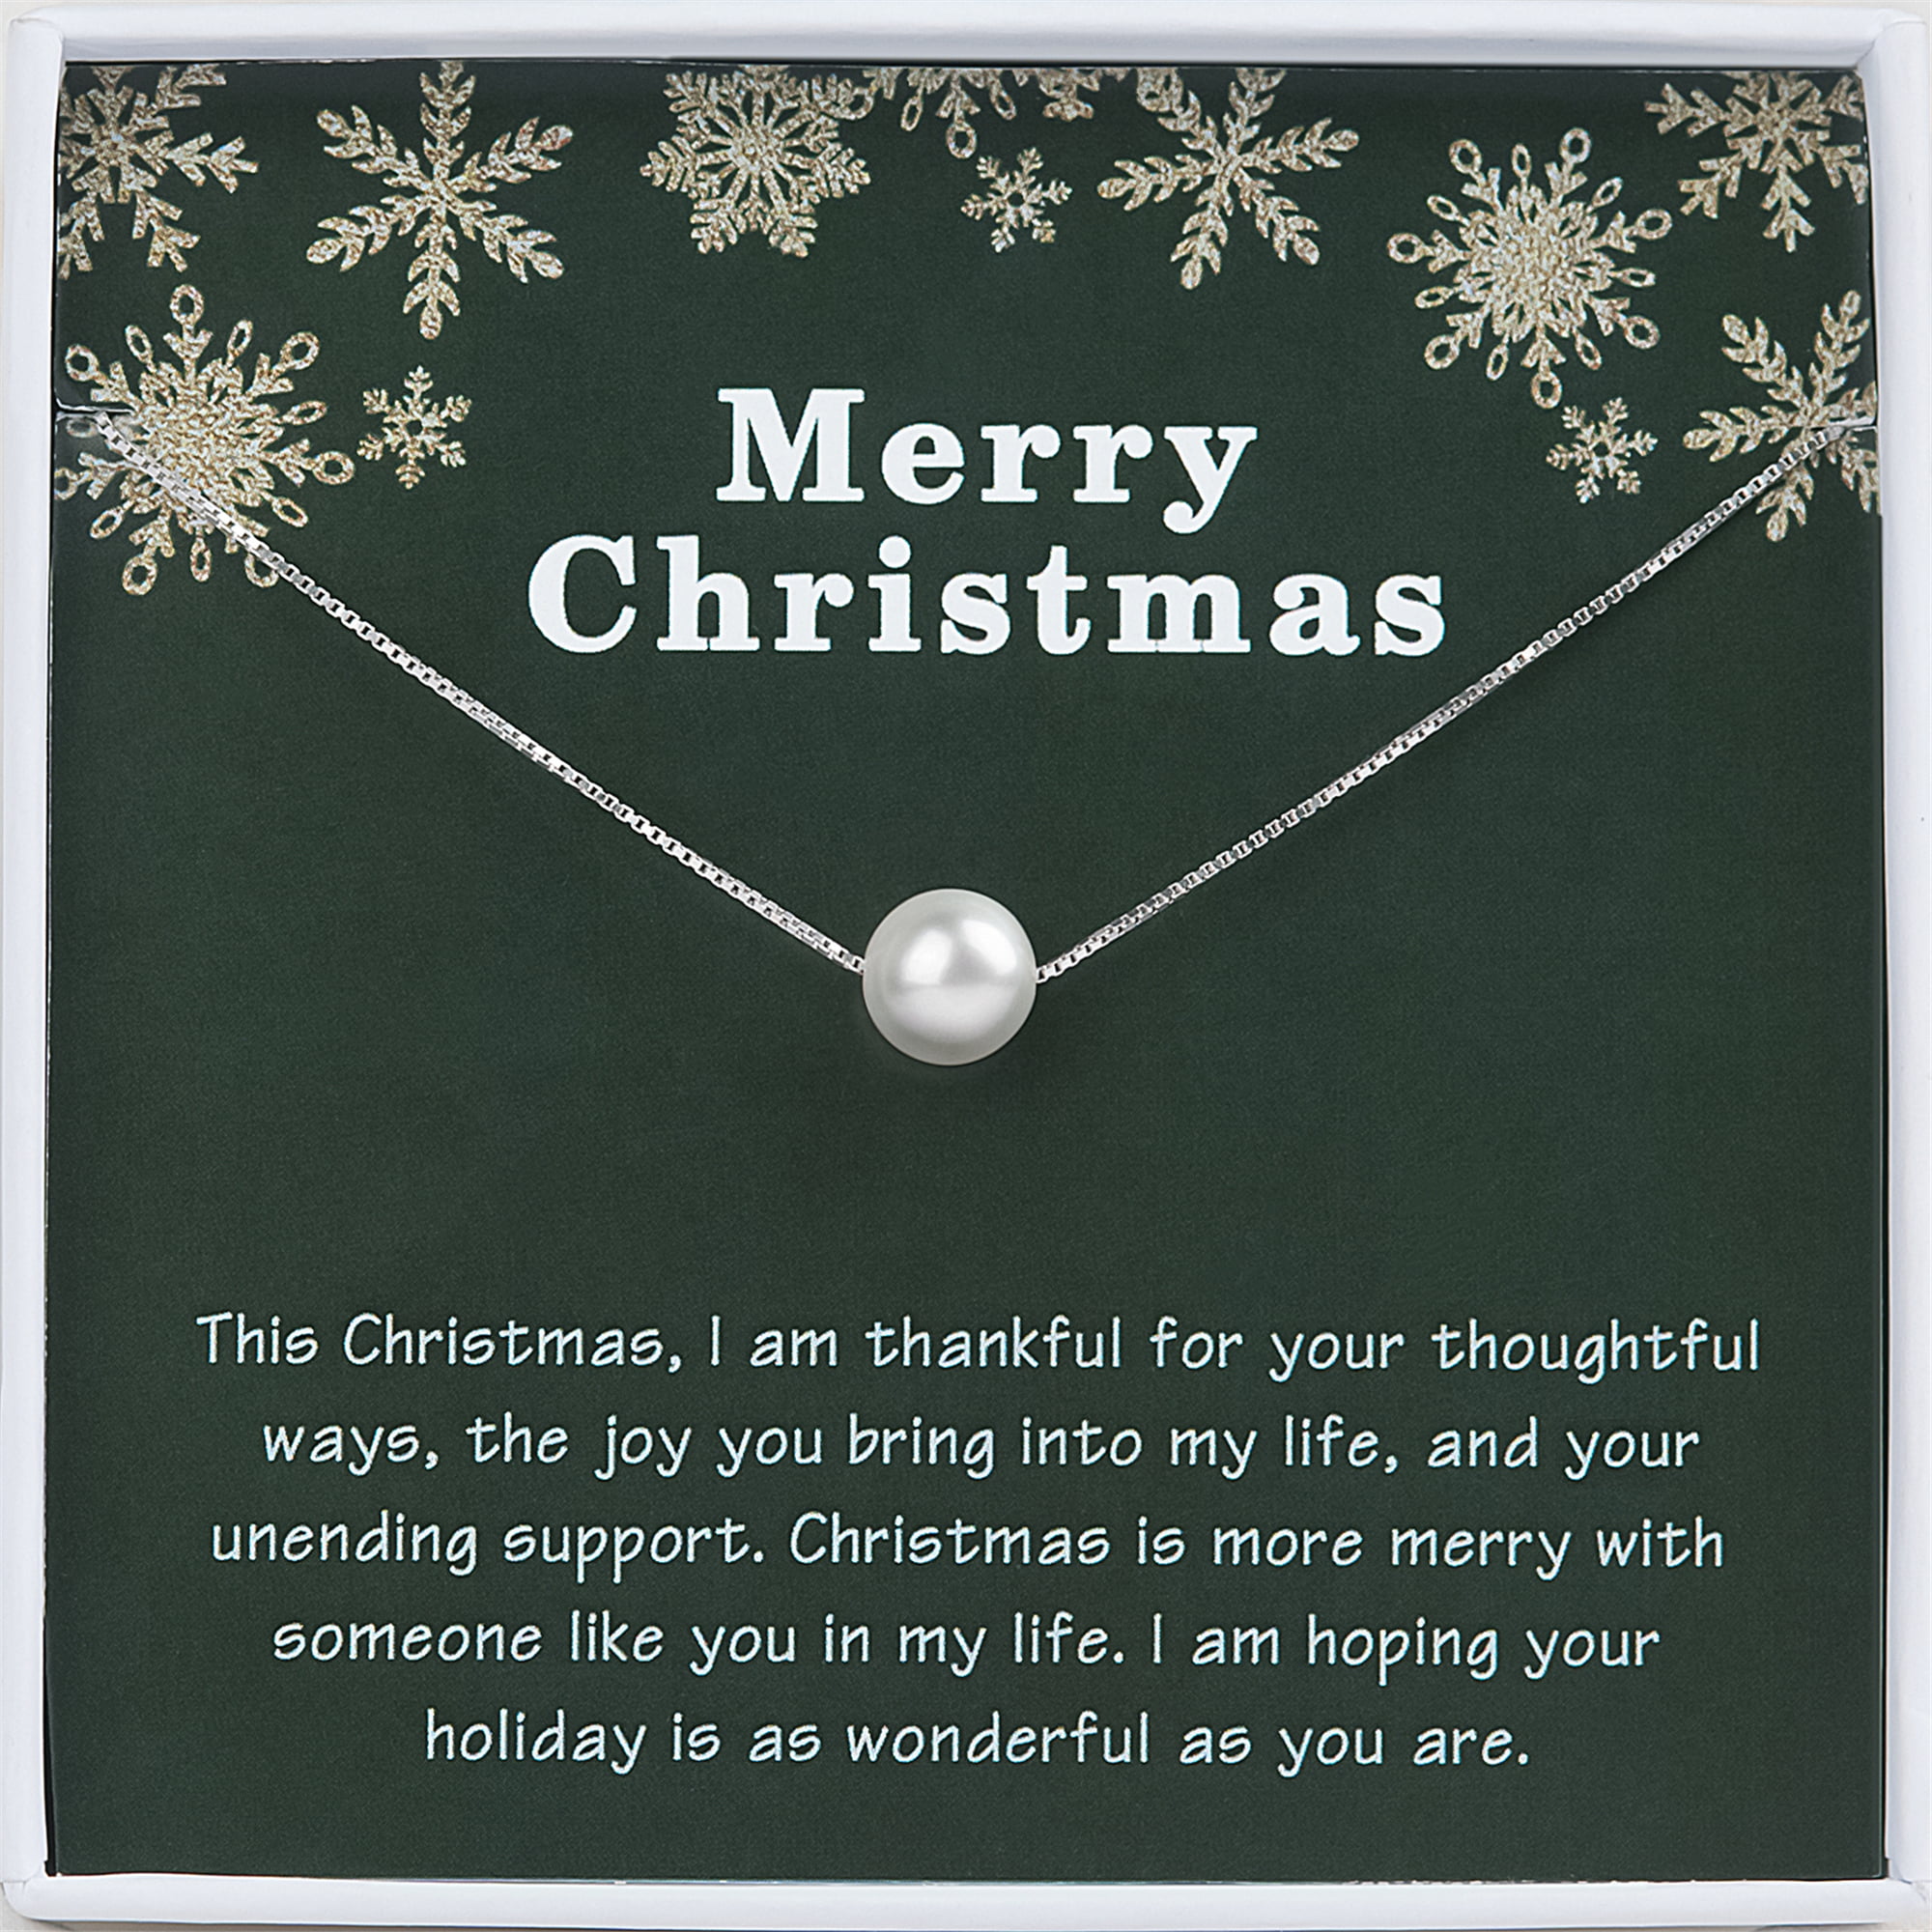 Anavia Christmas Thank You Gifts Sterling Silver Pearl Necklace for Mom from Son, Christmas Gift for Wife from Husband-[White Pearl + Silver Chain]